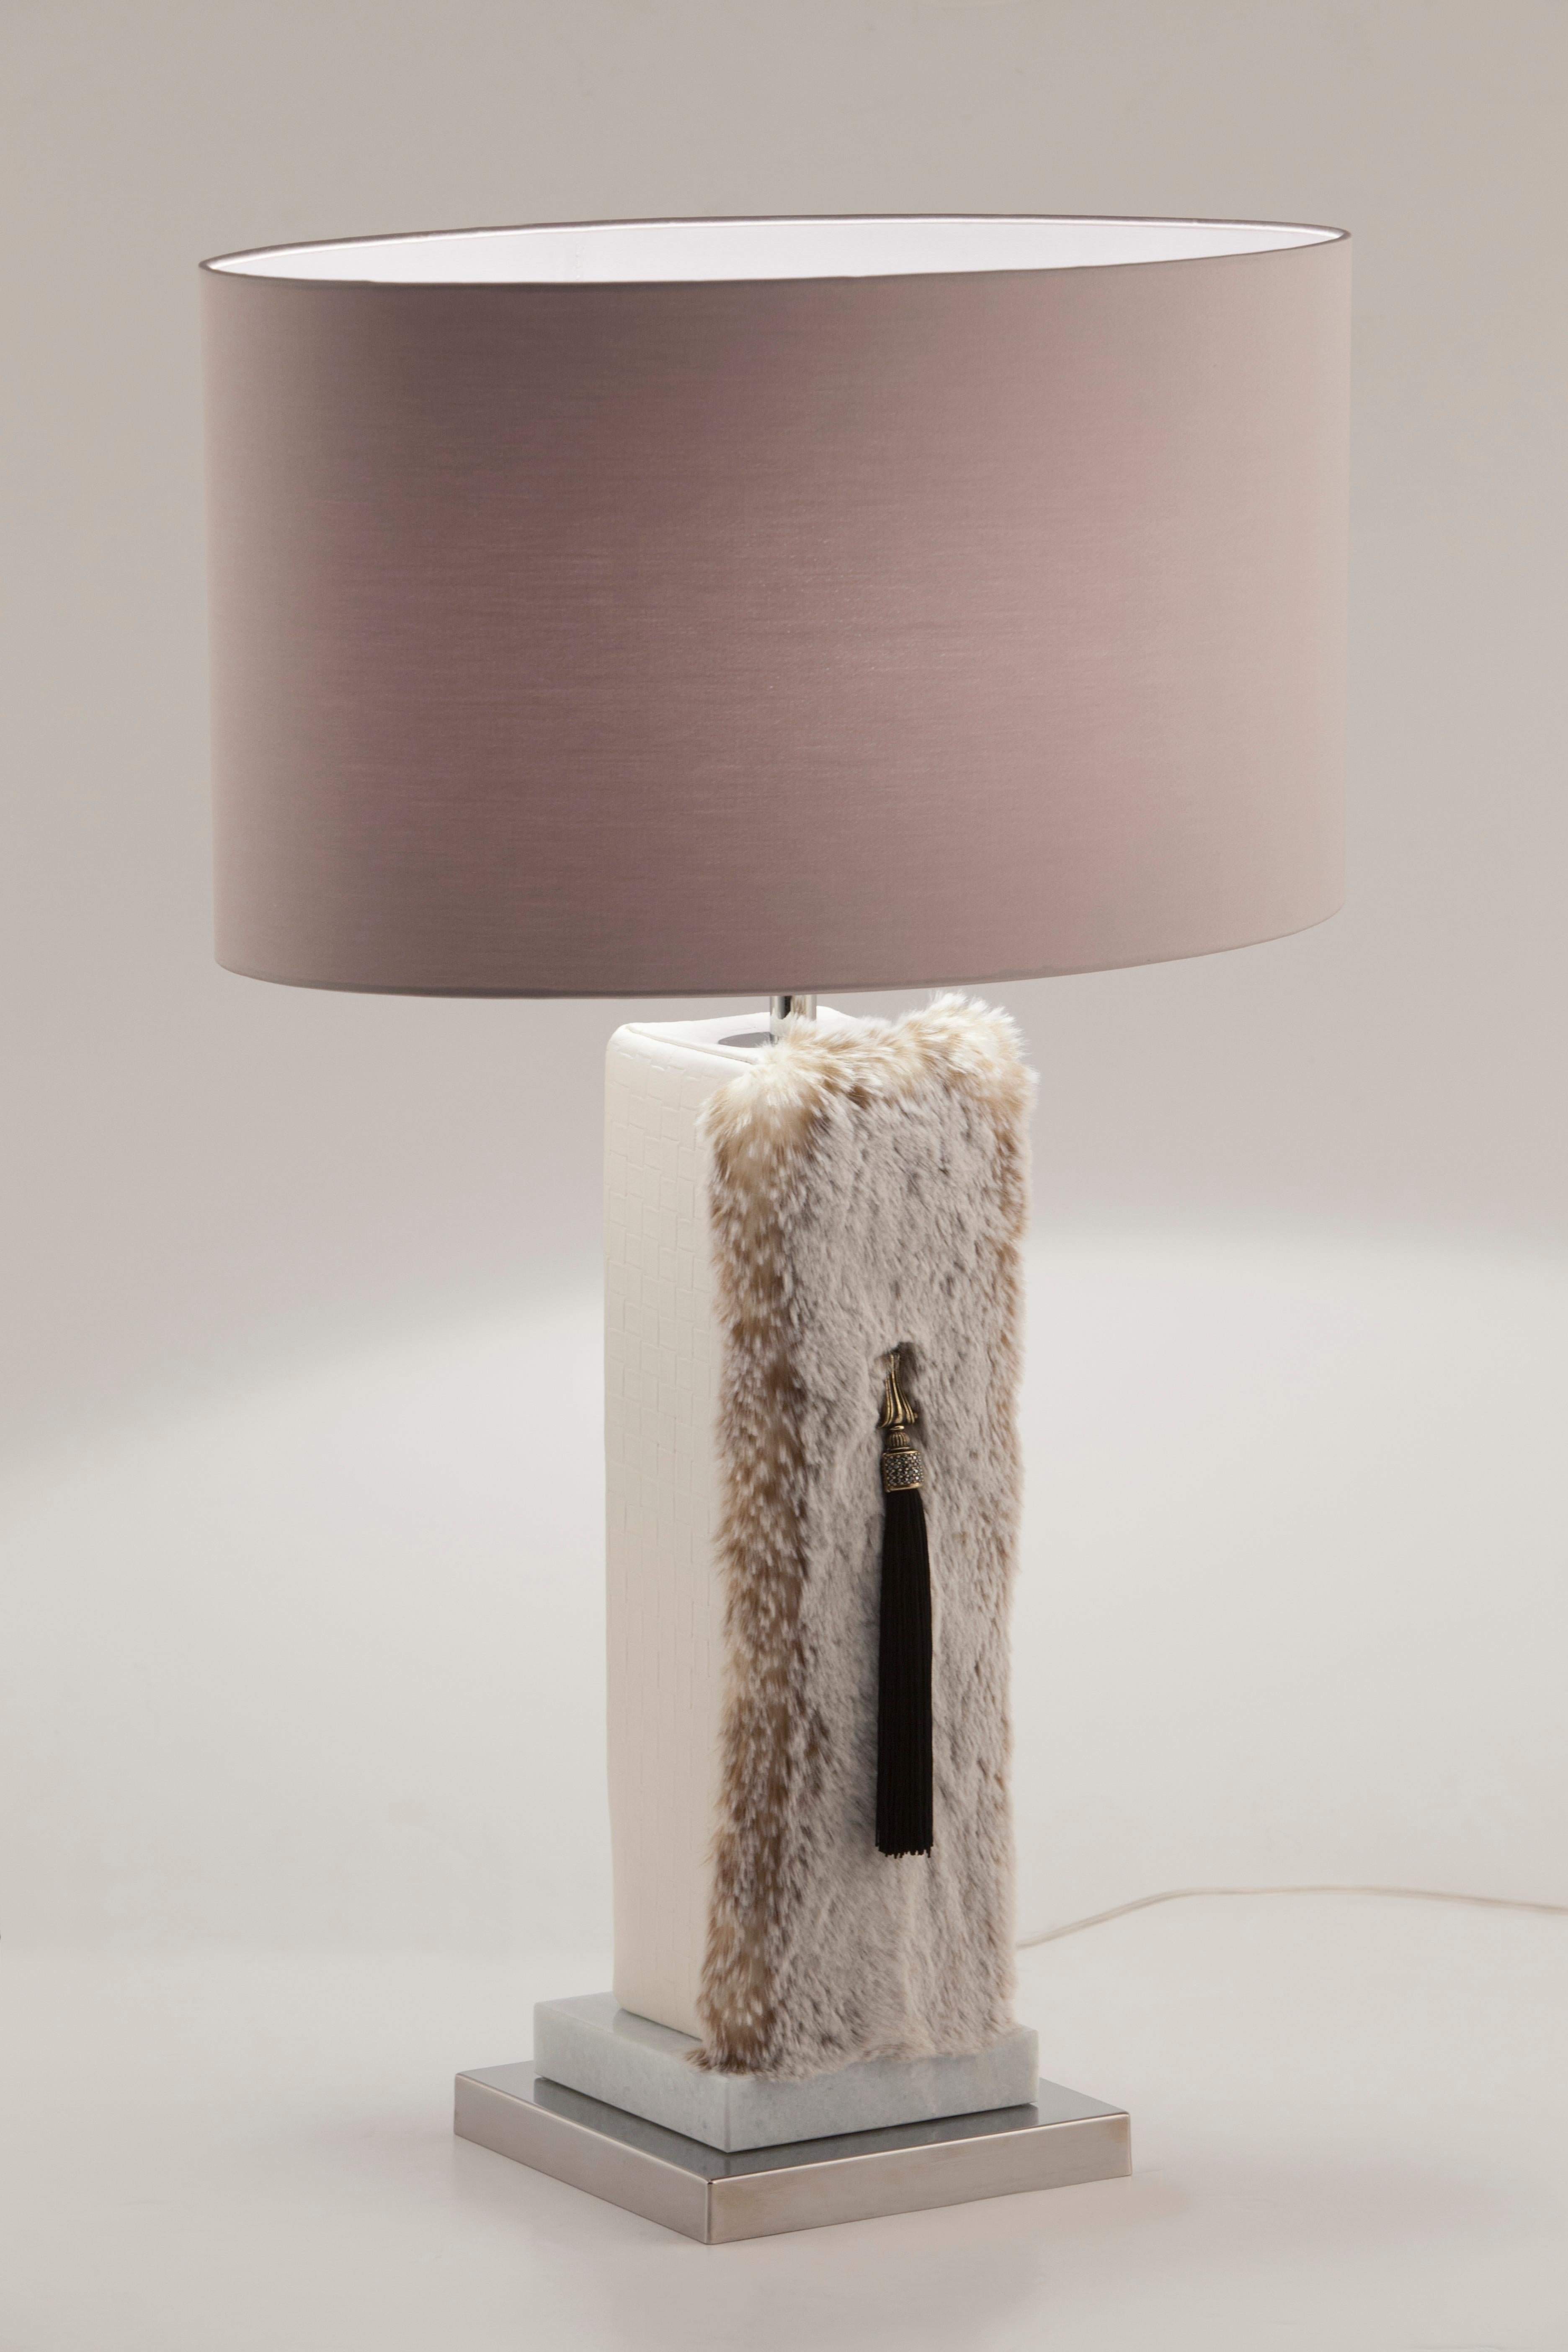 Portuguese Set of 2 Art Deco Matos Table Lamp, Beige Lampshade, Faux Fur, by Greenapple For Sale